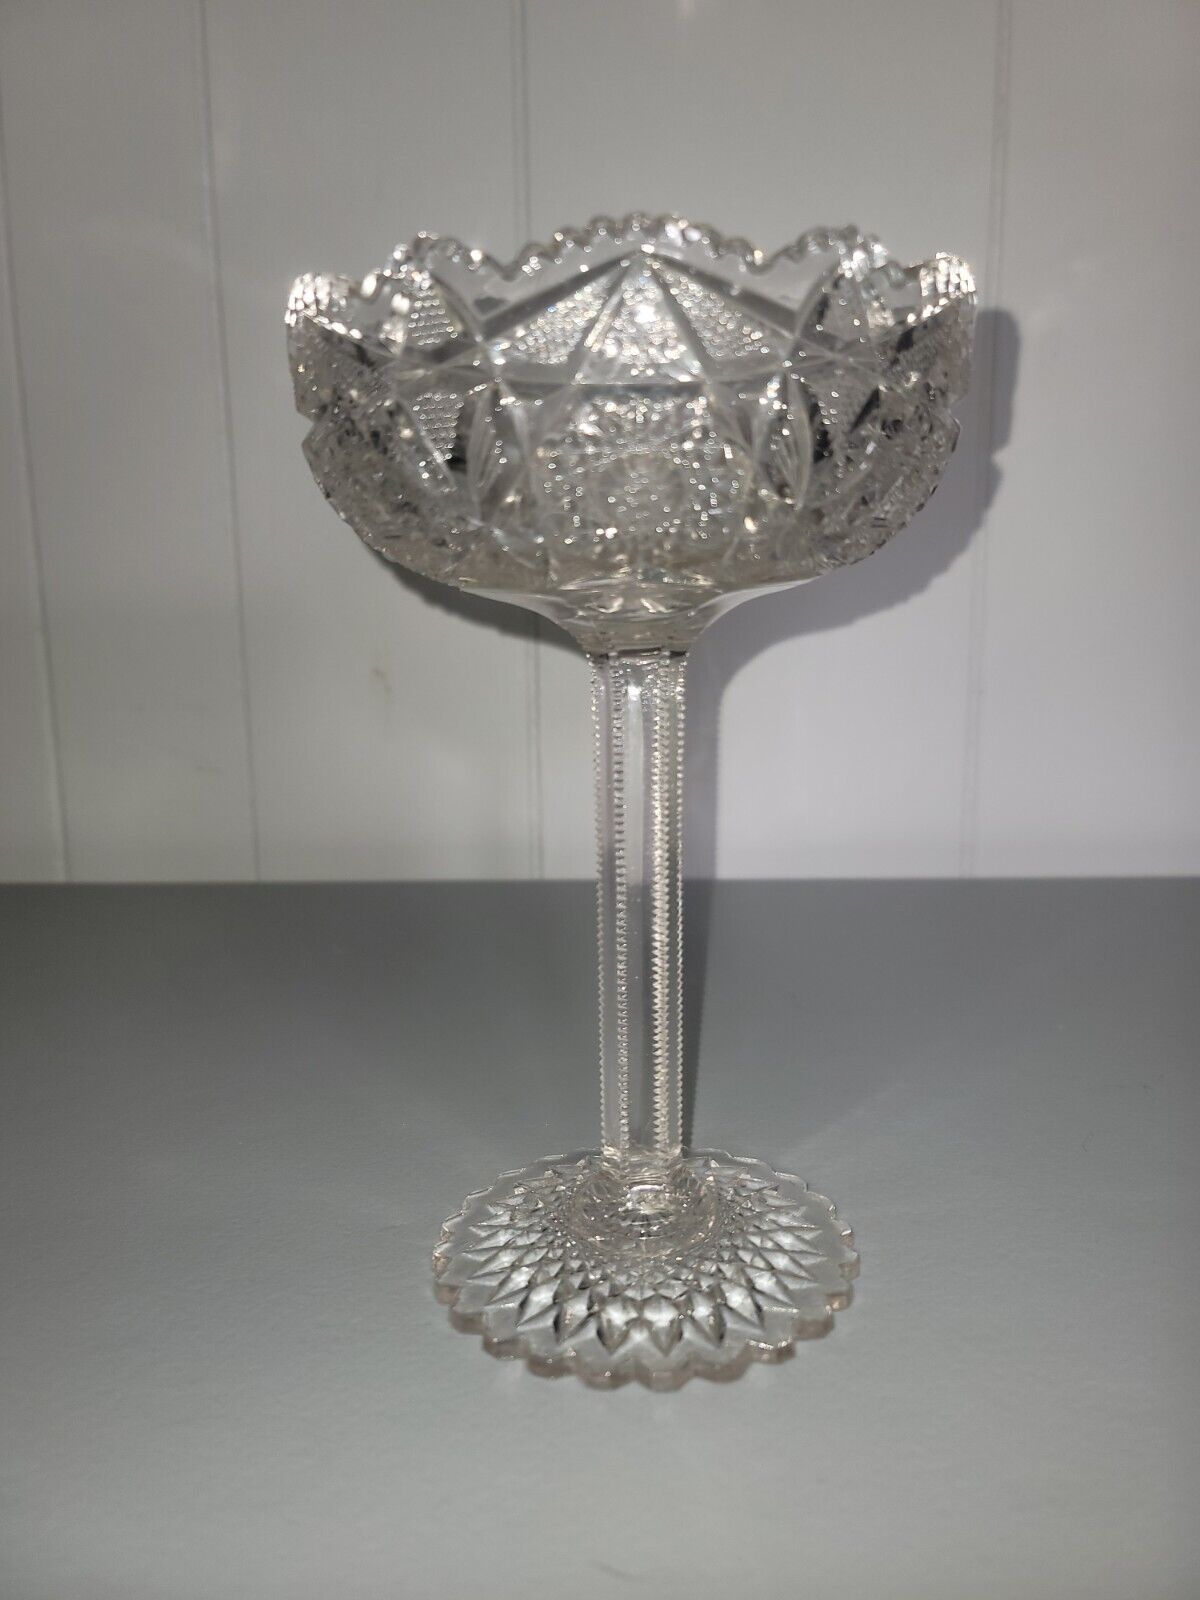 Antique 1880 / 1900 Pressed Glass Era Large Compote Crystal Cut Glass